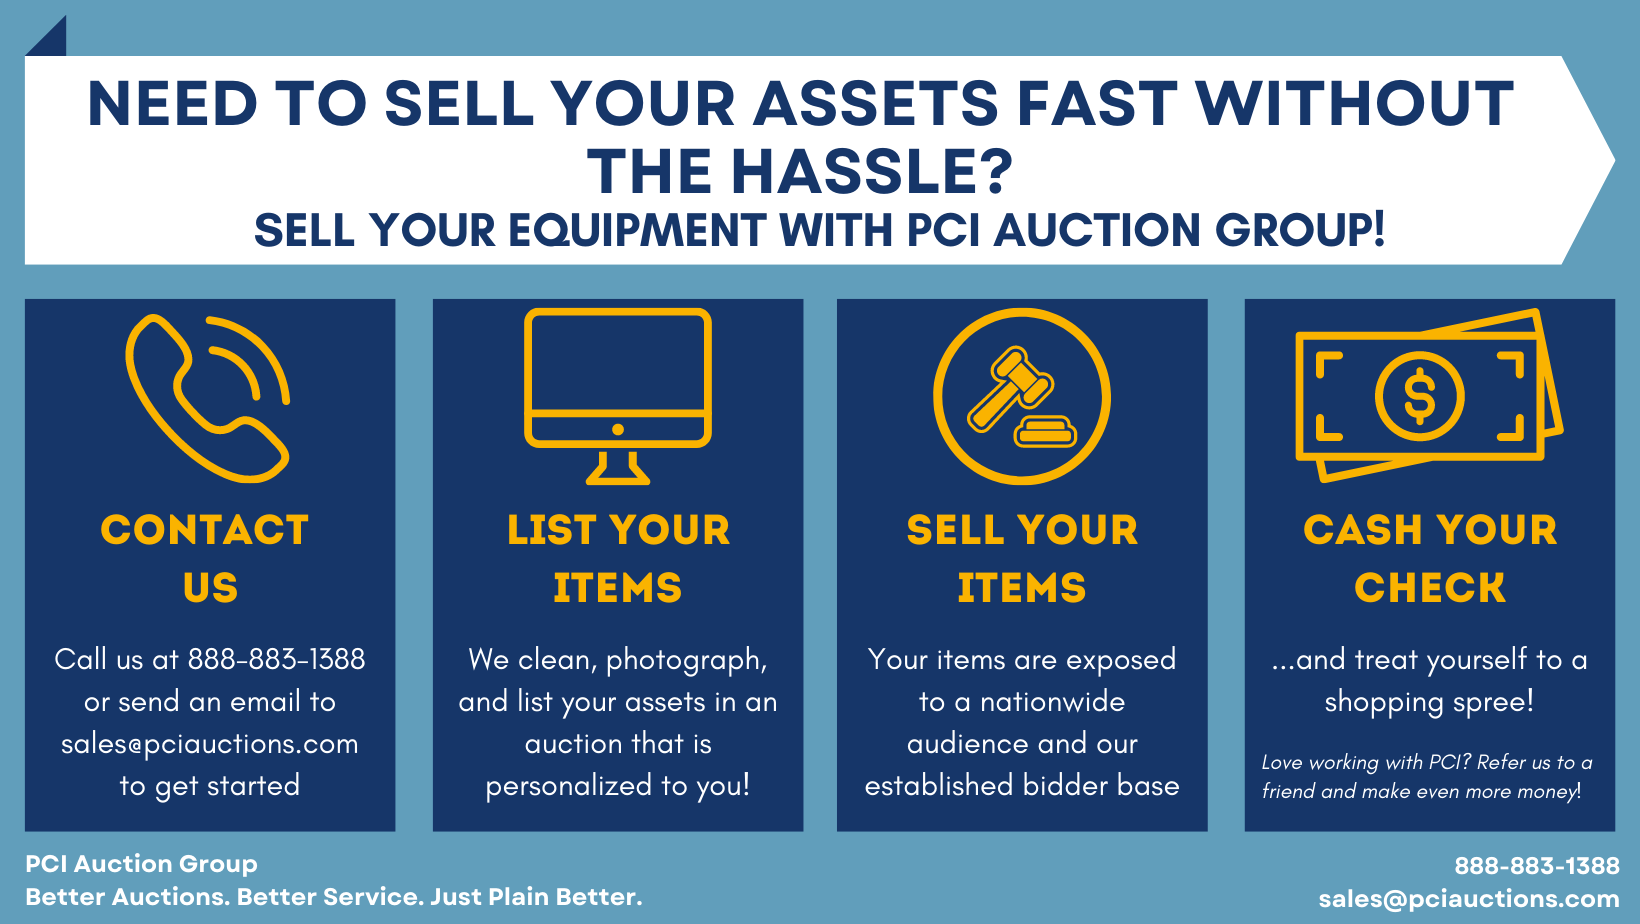 Need to sell your assets fast without the hassle? Sell your equipment with PCI Auction Group